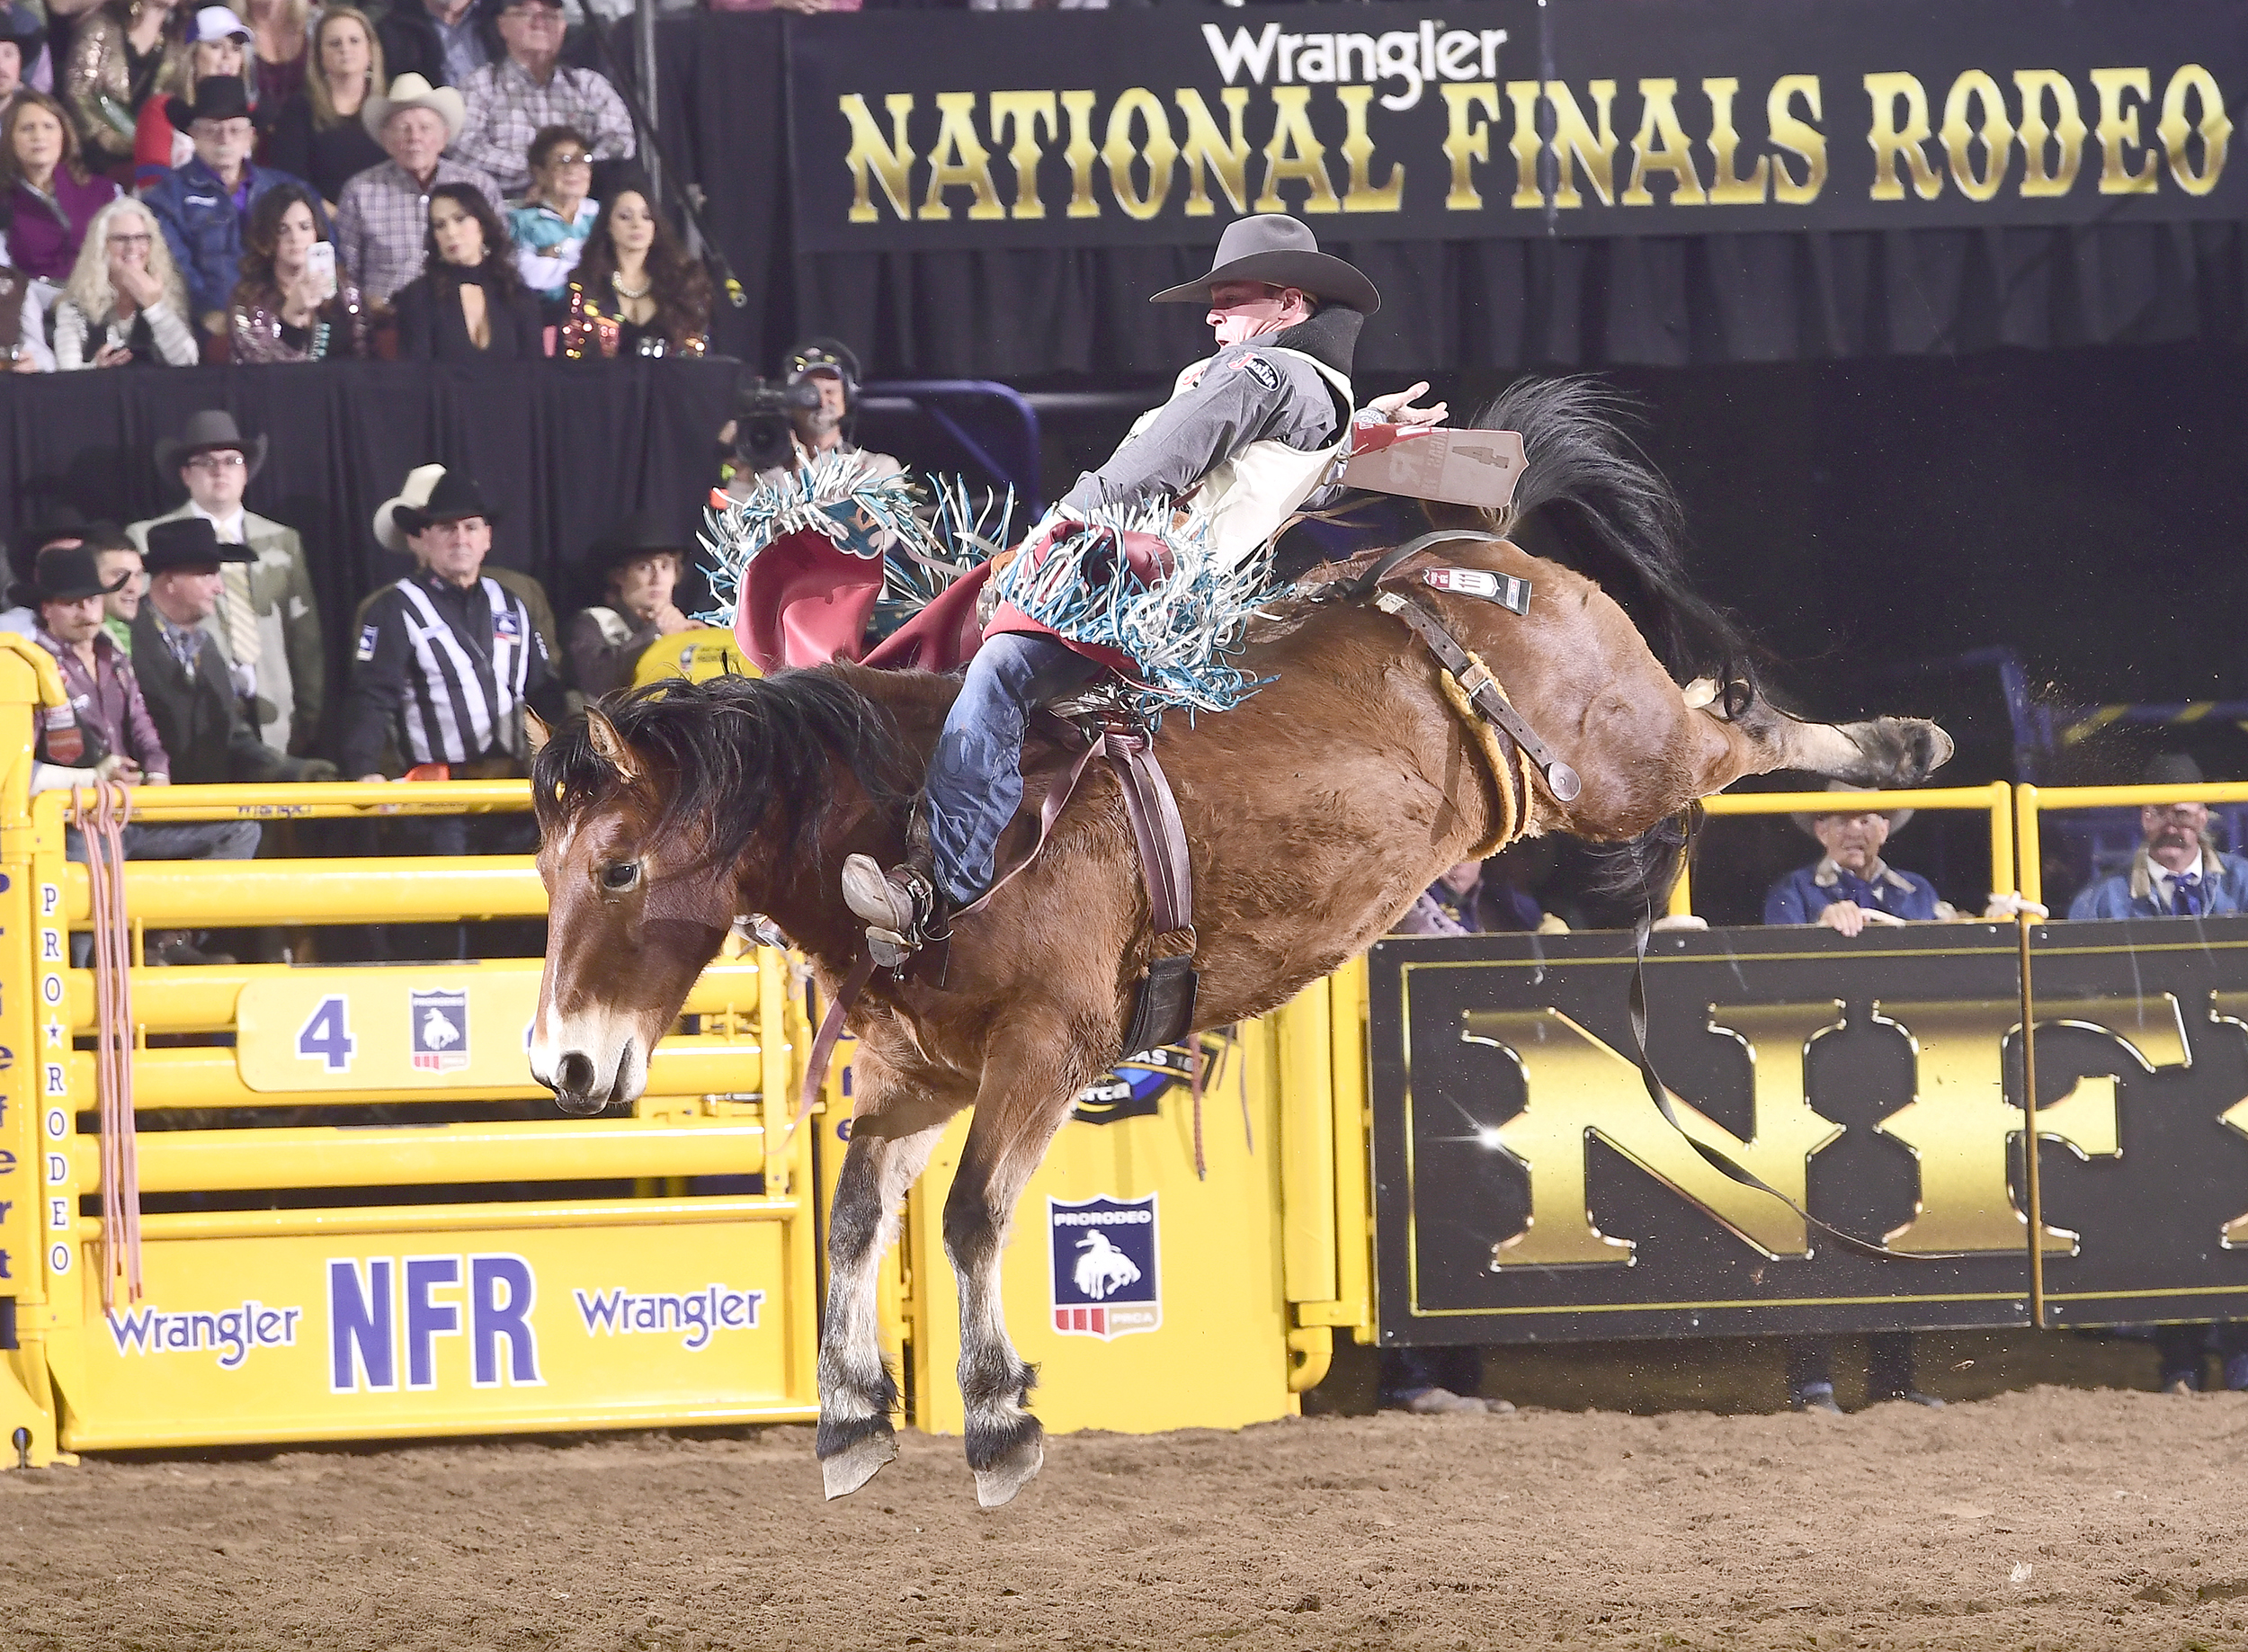 After a slow start, two-time world champion bareback rider Tim O'Connell has picked up two key paychecks in Rounds 3 and 4. On Sunday night, he rode Burch Rodeo's Pip Squeak for 84.5 points. (PRCA PRORODEO PHOTO BY JAMES PHIFER)